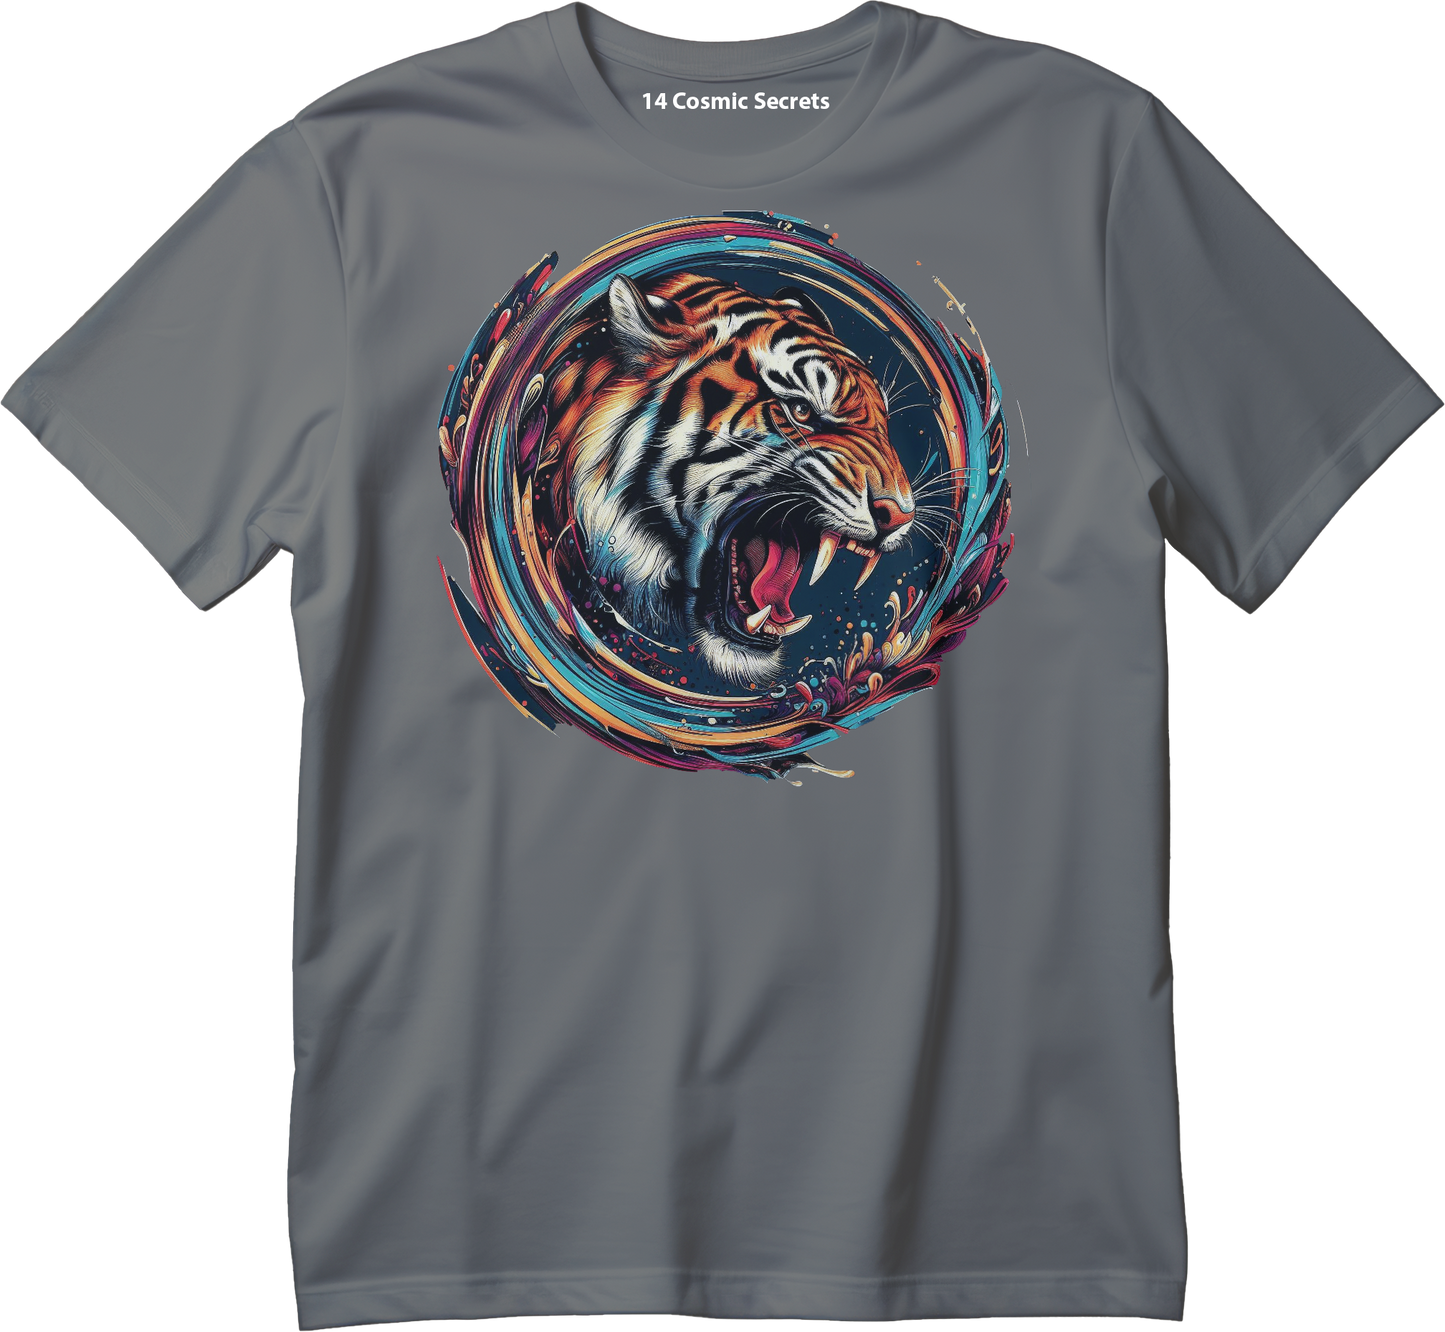 Bengal Stripes Supreme Tee Graphic Printed T-Shirt  Cotton T-Shirt Magnificence of India T-Shirt